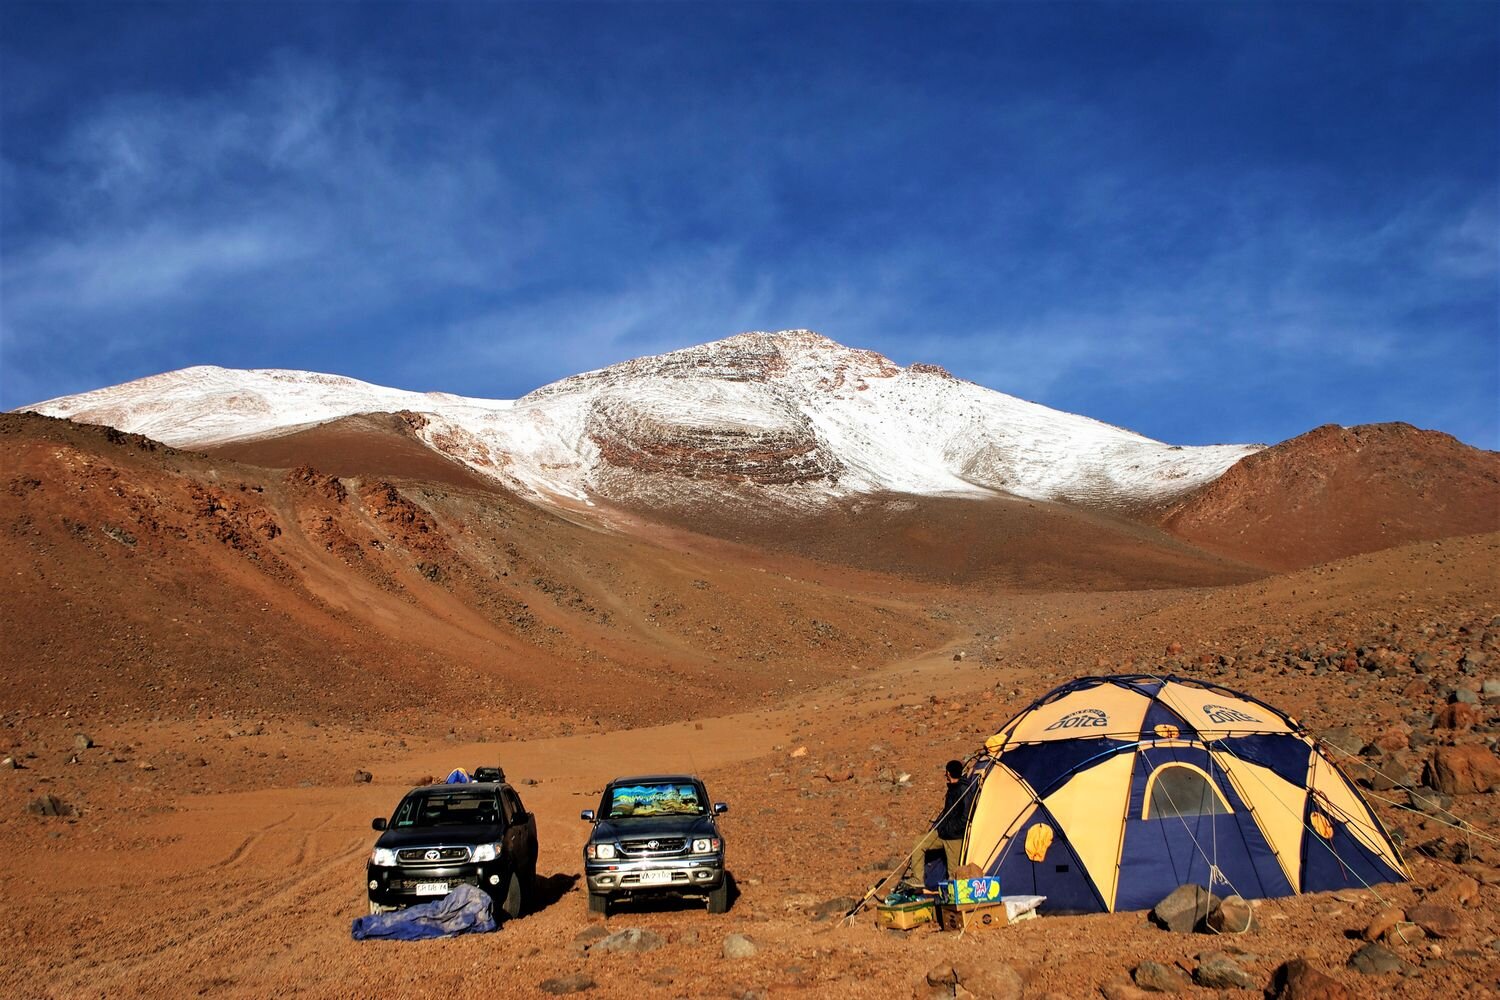  Llullaillaco volcano base camp, at 5000 meters. Llullaillaco National Park. 